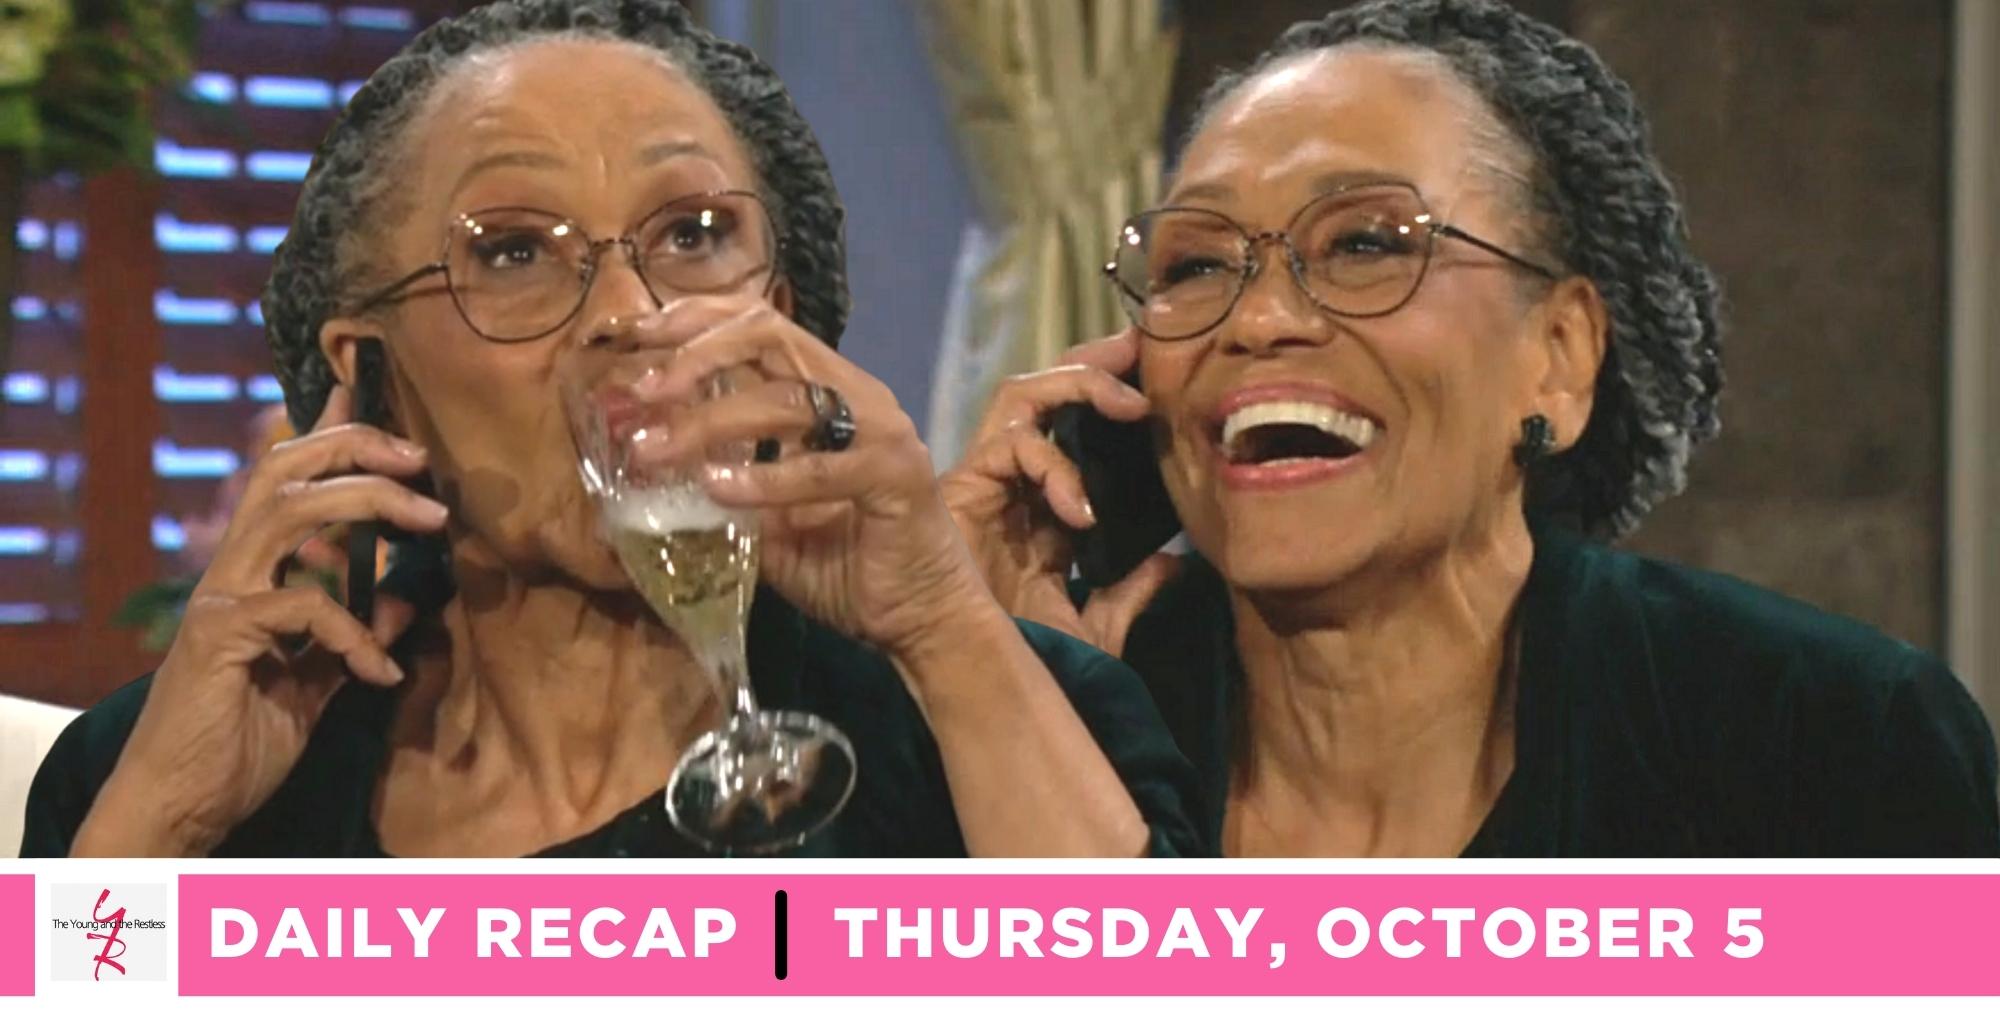 the young and the restless recap for october 5, 2023, has double images of mamie on the phone smiling.